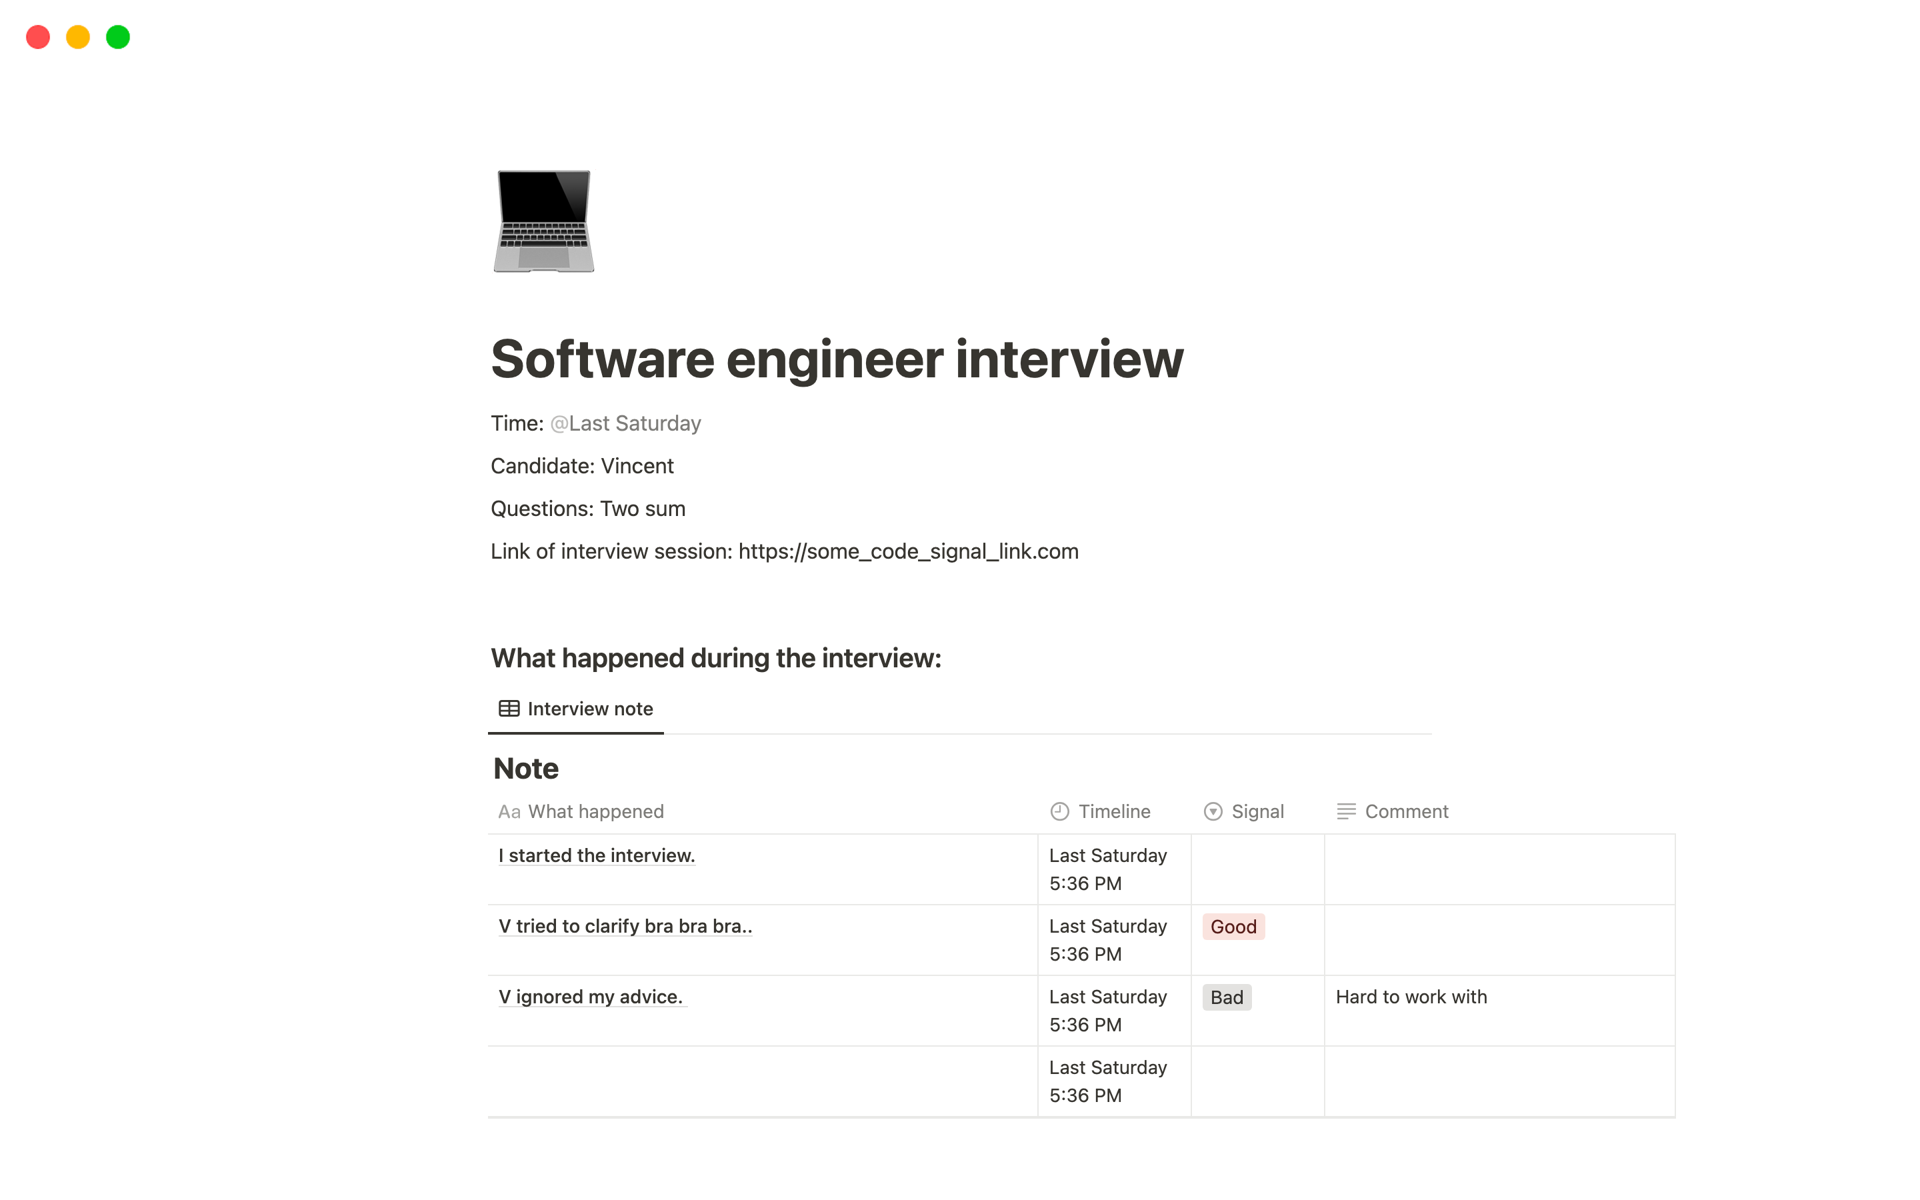 A simple template for software enigineer interviewer to take note.